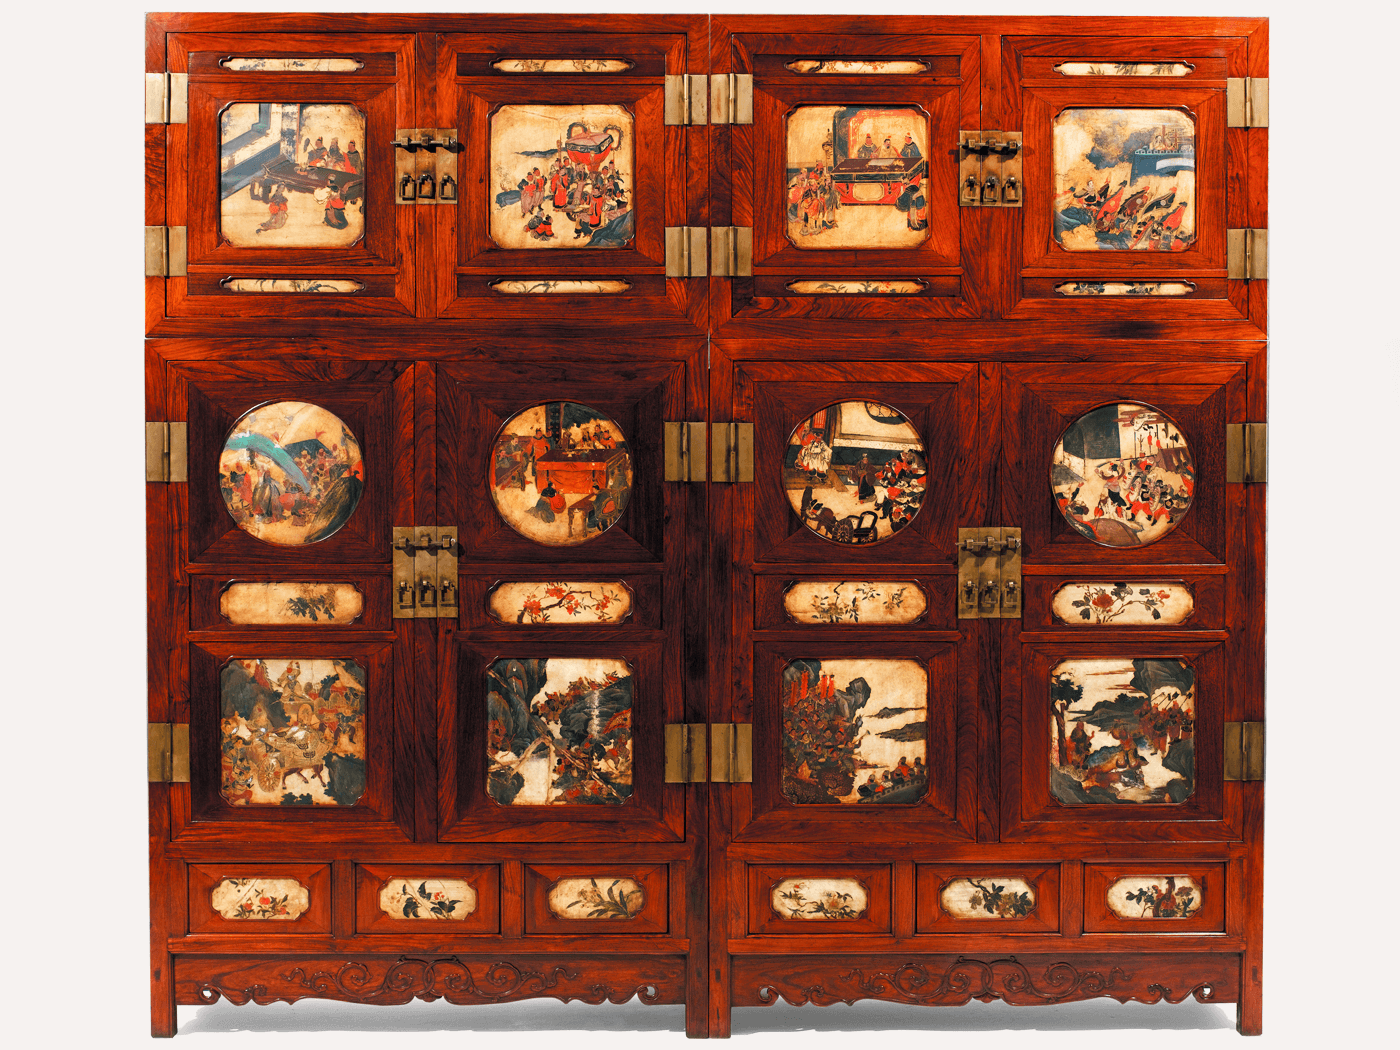 Pair of cabinets with scenes from the Romance of the Three Kingdoms